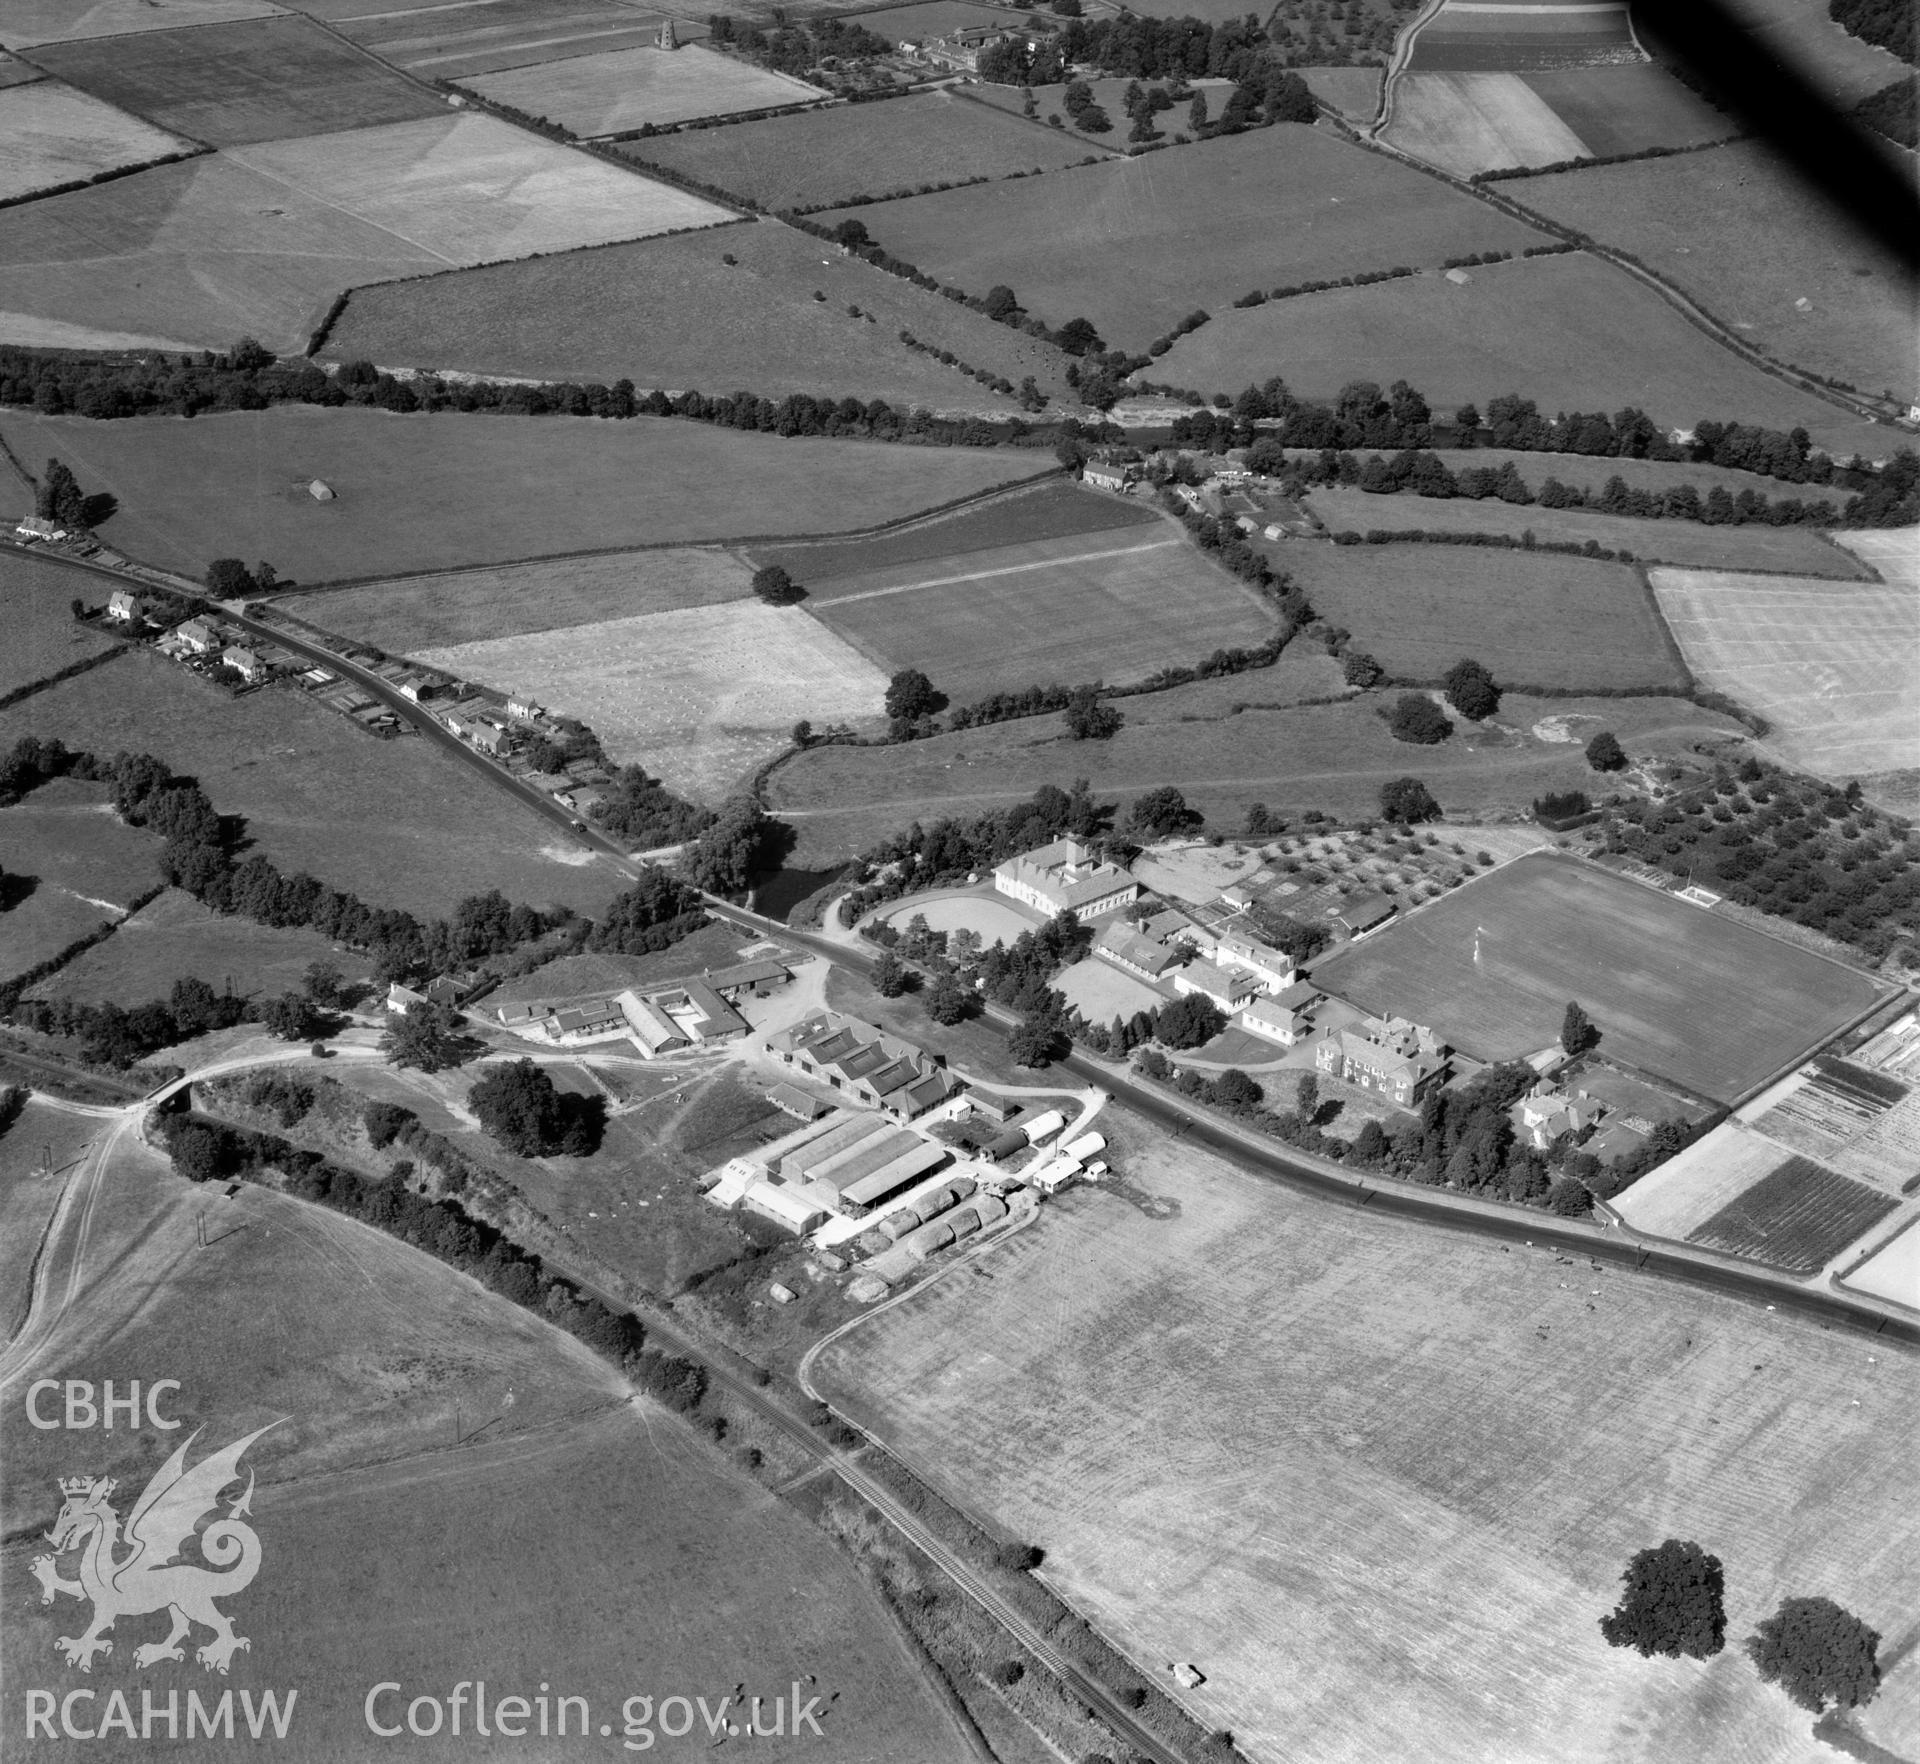 View of Monmouthshire Agricultural Institution, Rhadyr